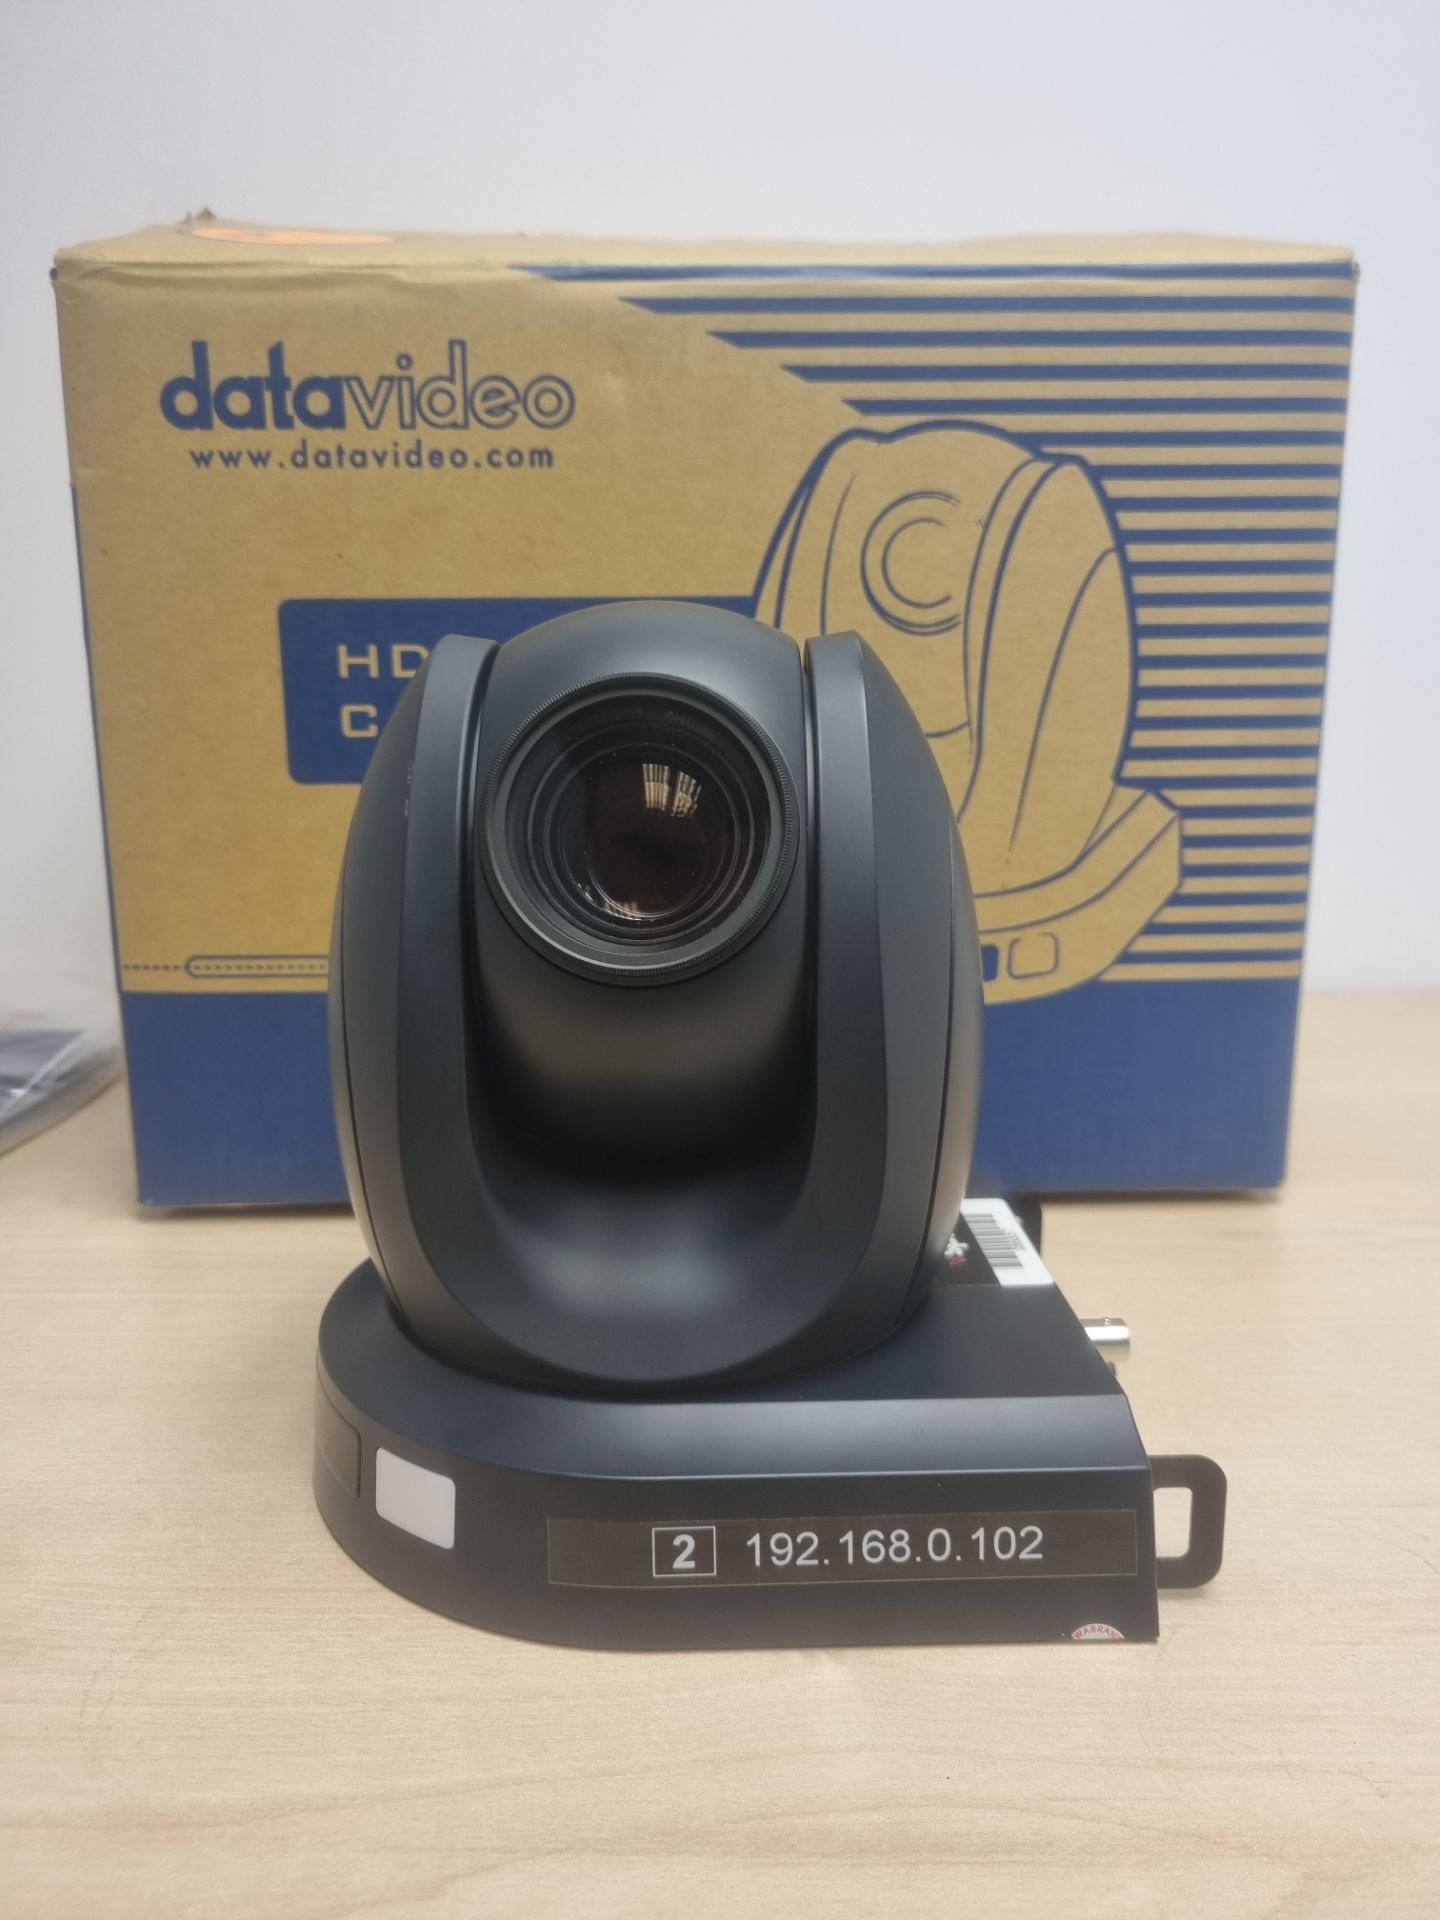 6 x DataVideo PTC-140 HD PTZ IP streaming camera, tested and working, STOCK IMAGE - Image 2 of 11